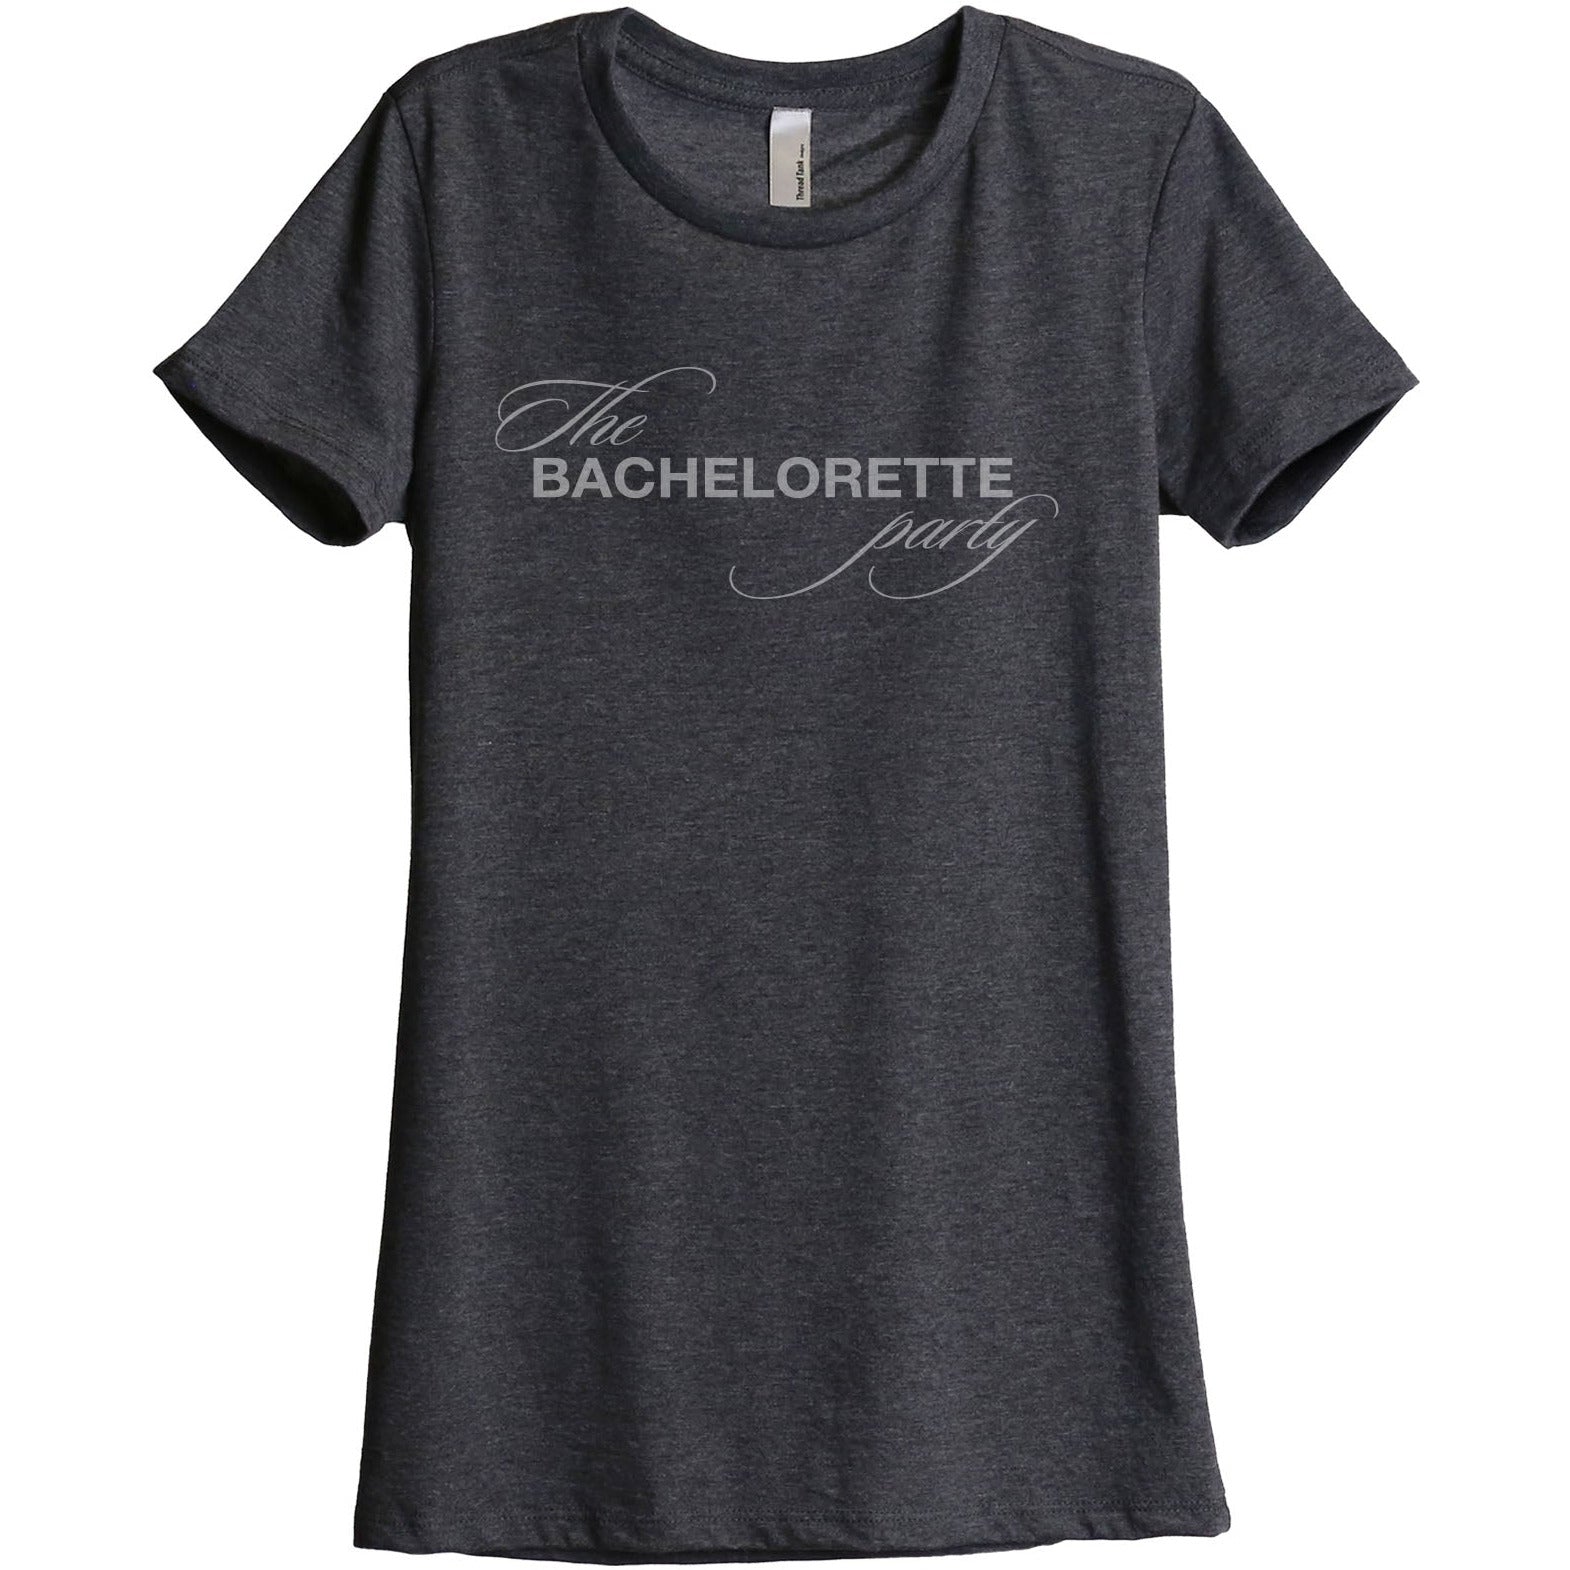 The Bachelorette Party - Stories You Can Wear